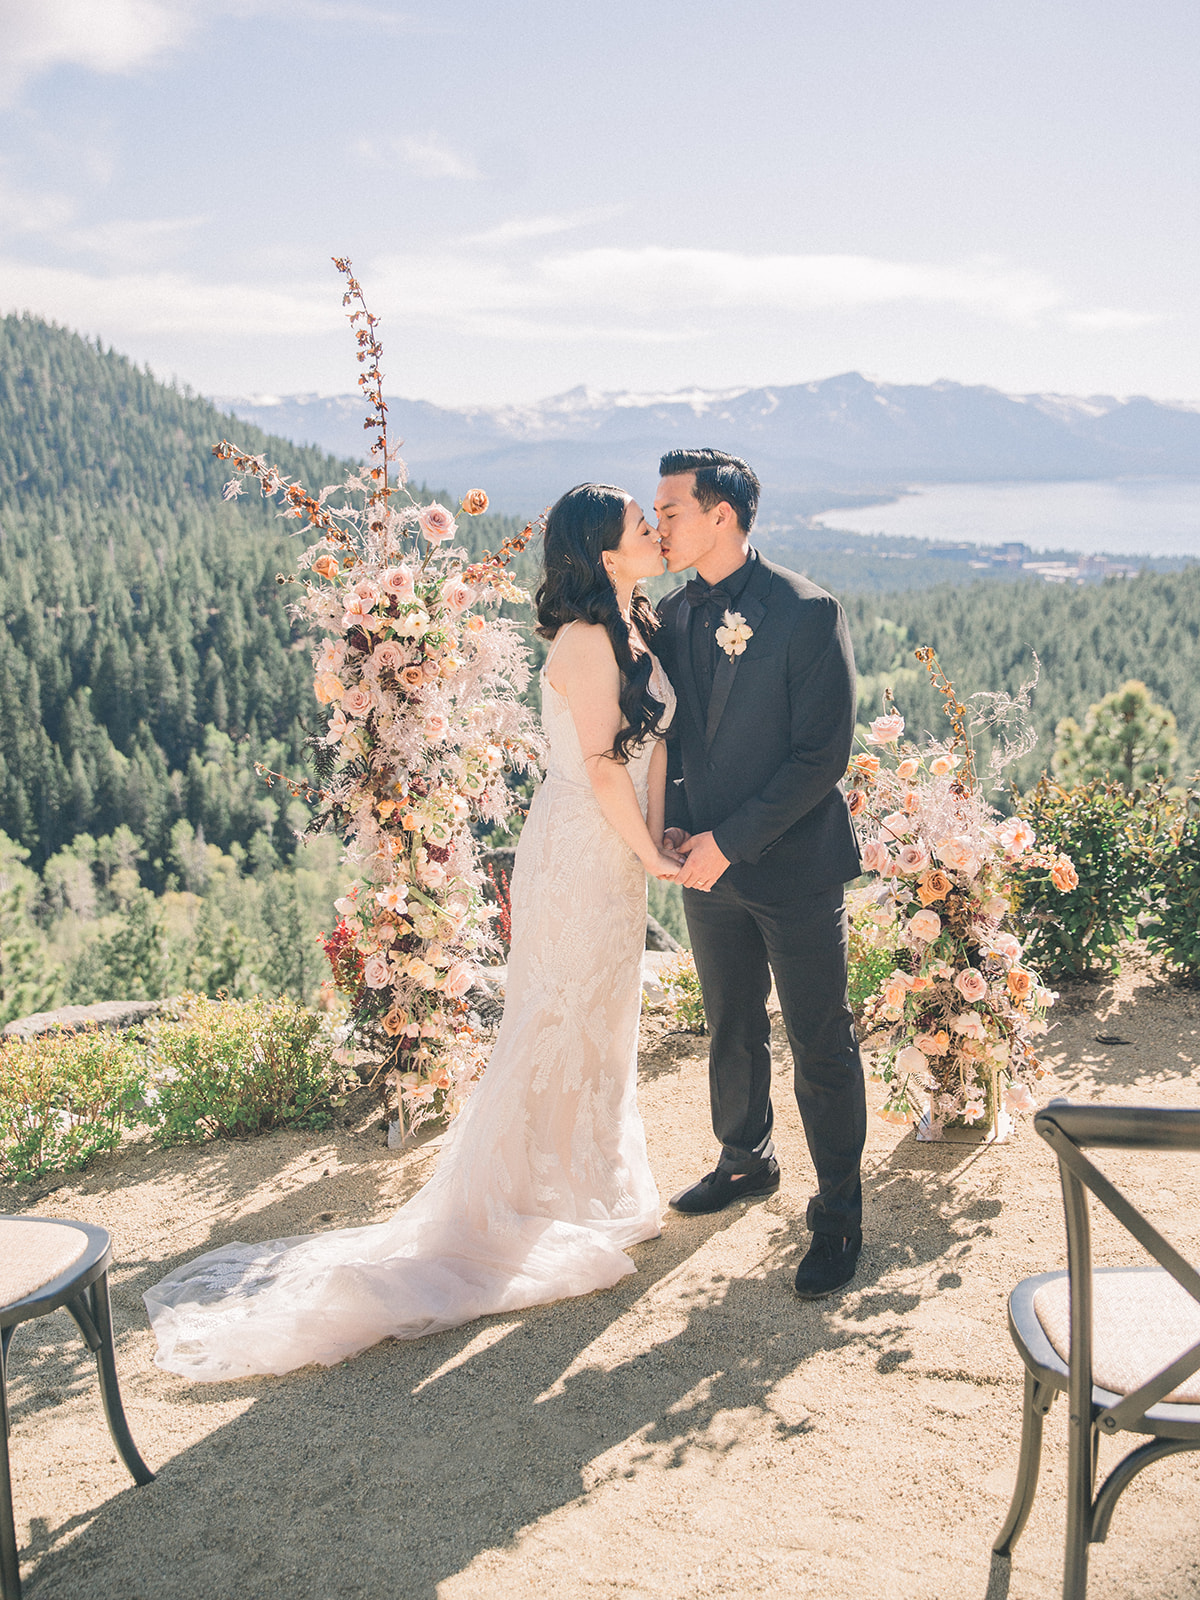 Modern bohemian wedding inspiration at Lake Tahoe with four dreamy bridal gowns